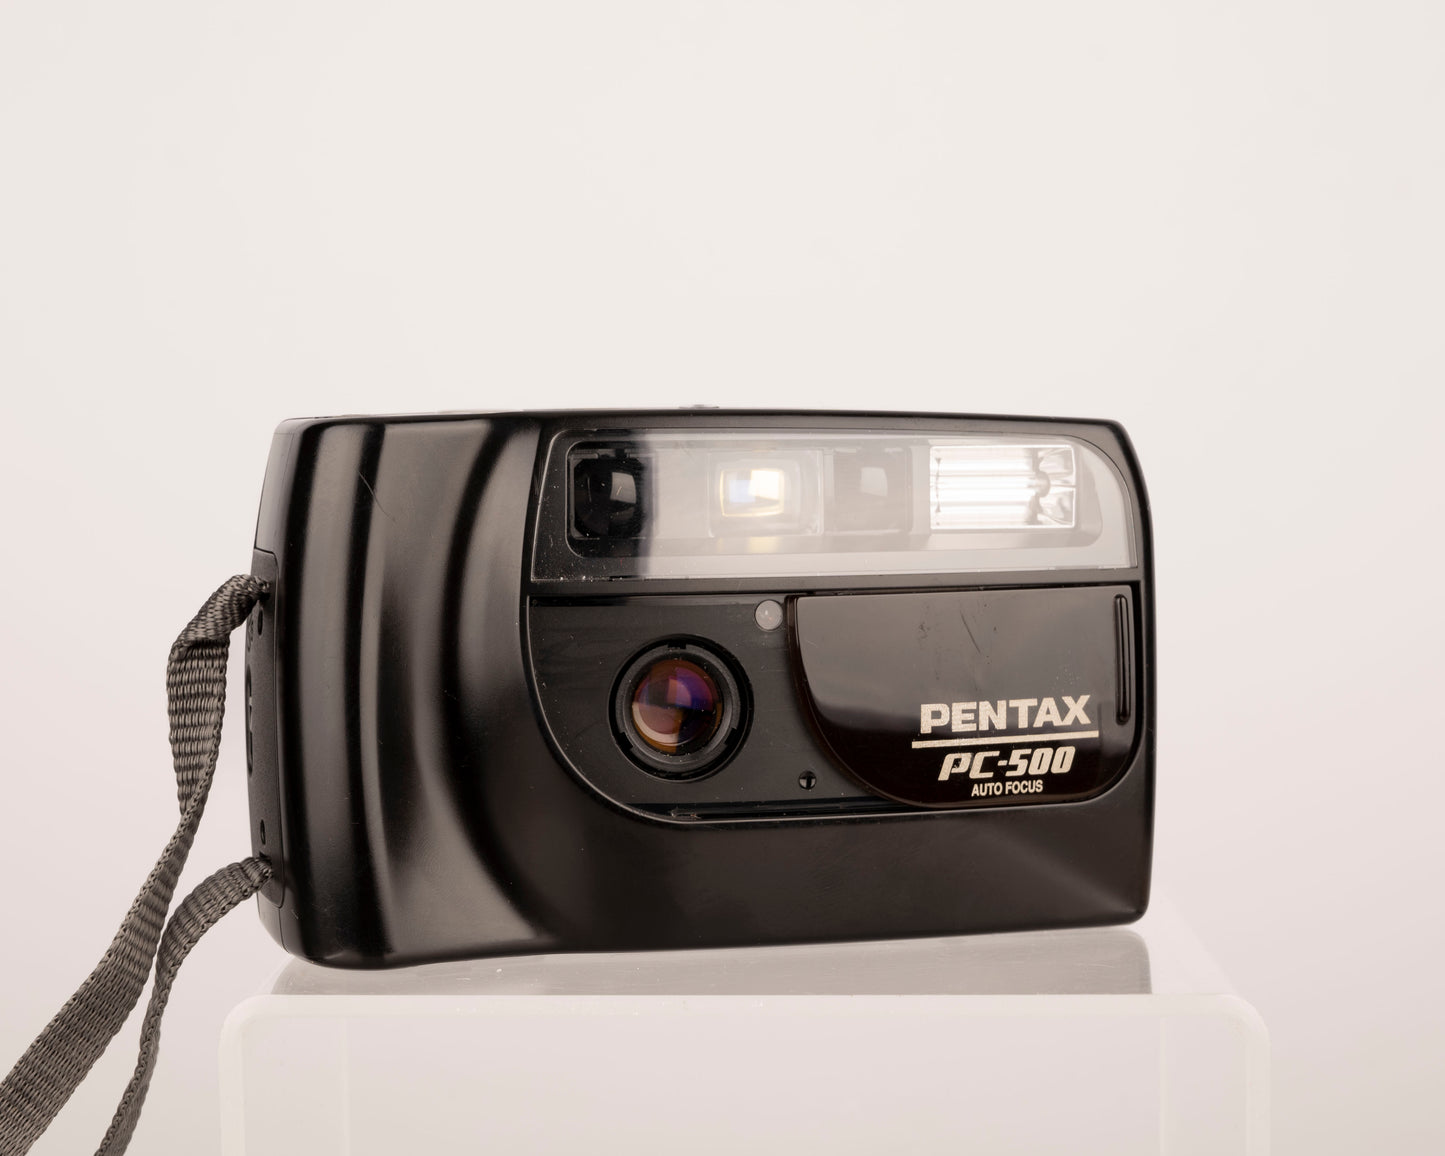 The Pentax PC-500 is a simple autofocus 35mm film camera from the late 1990s